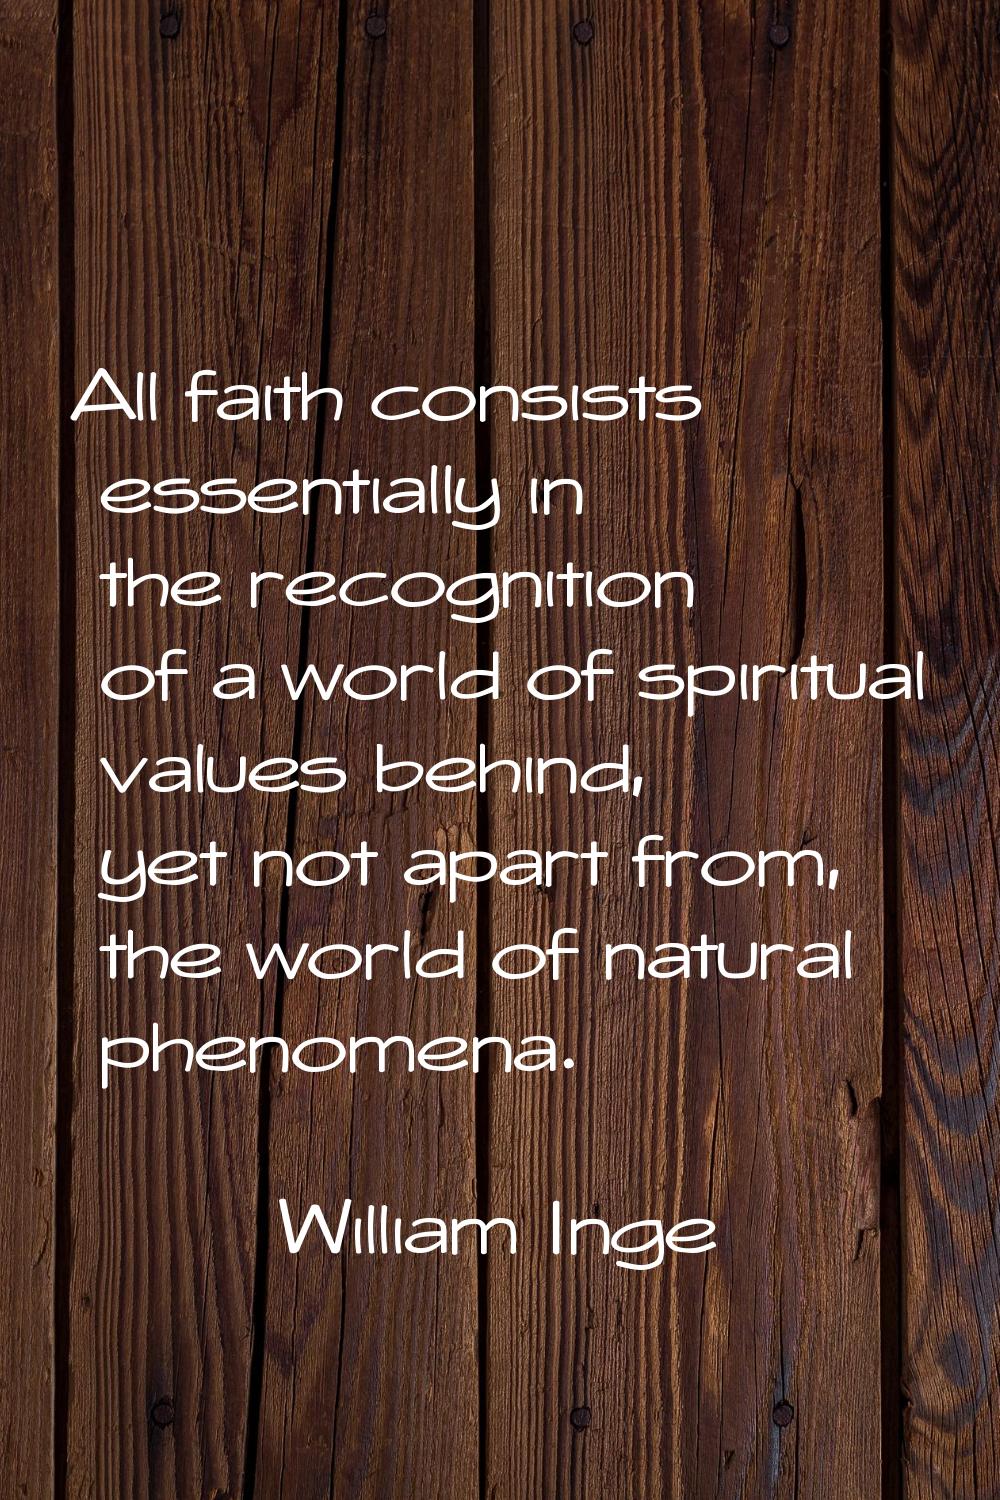 All faith consists essentially in the recognition of a world of spiritual values behind, yet not ap